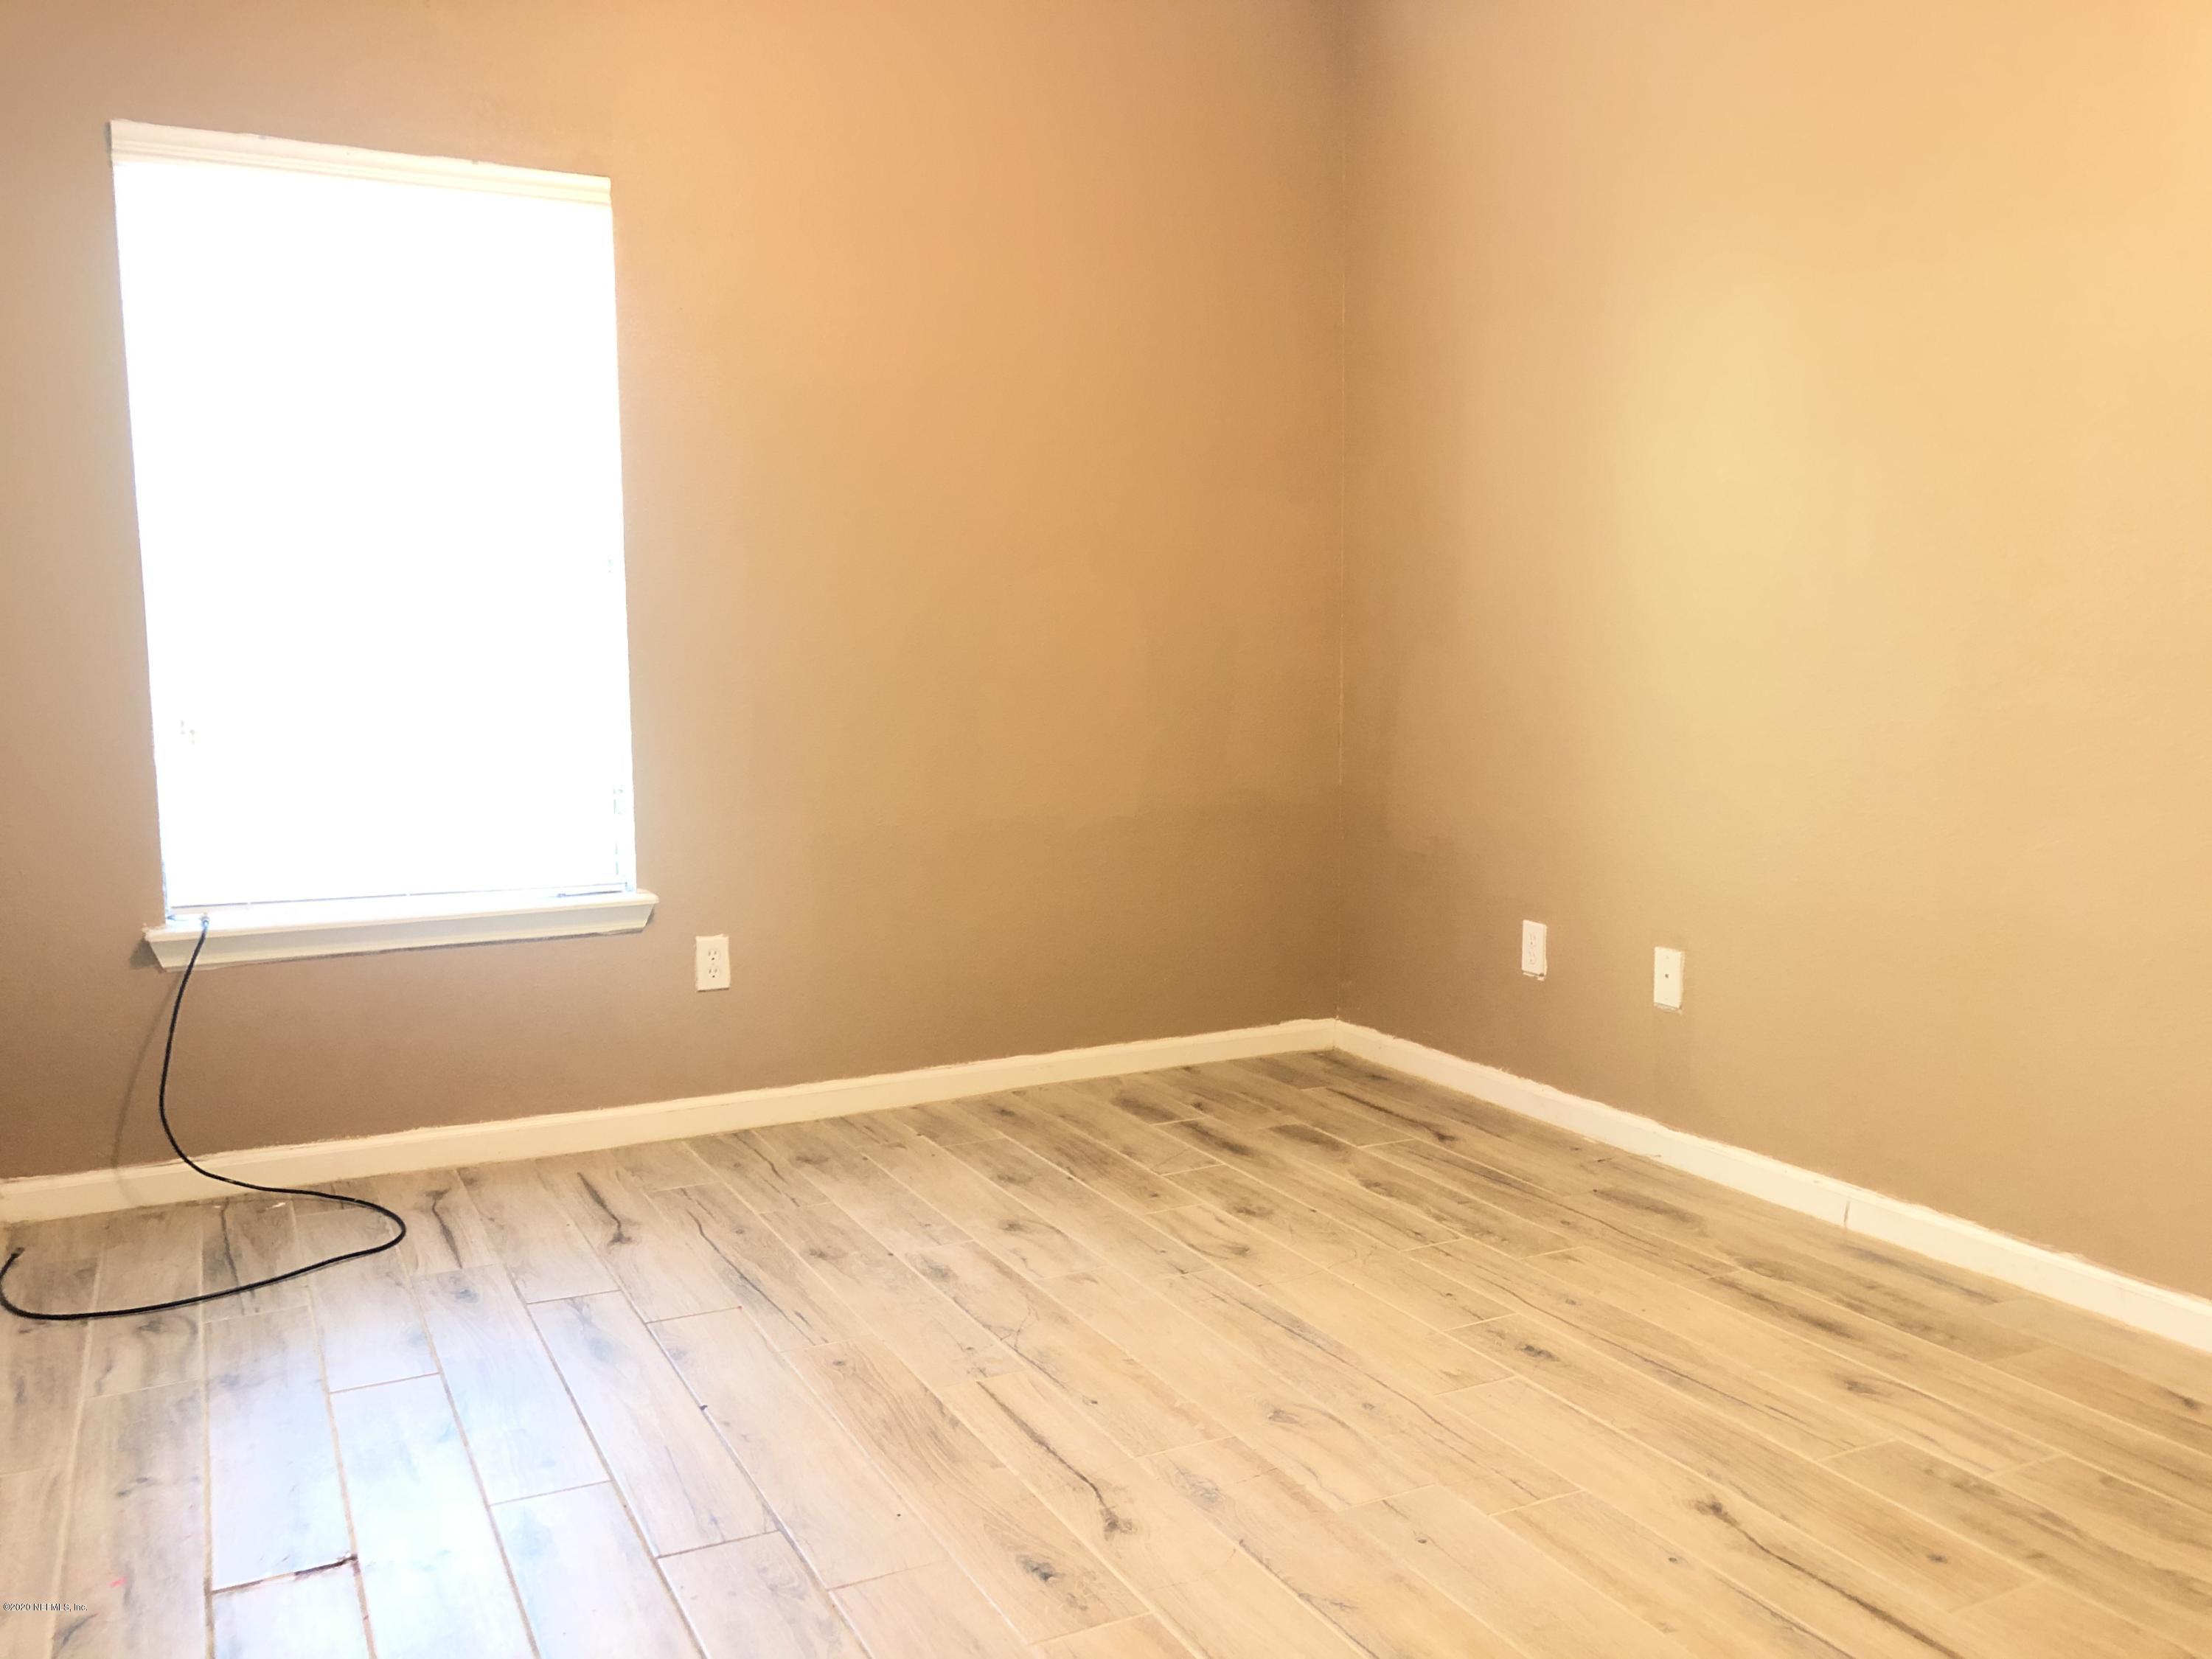 a view of a room with a wooden floor and a window